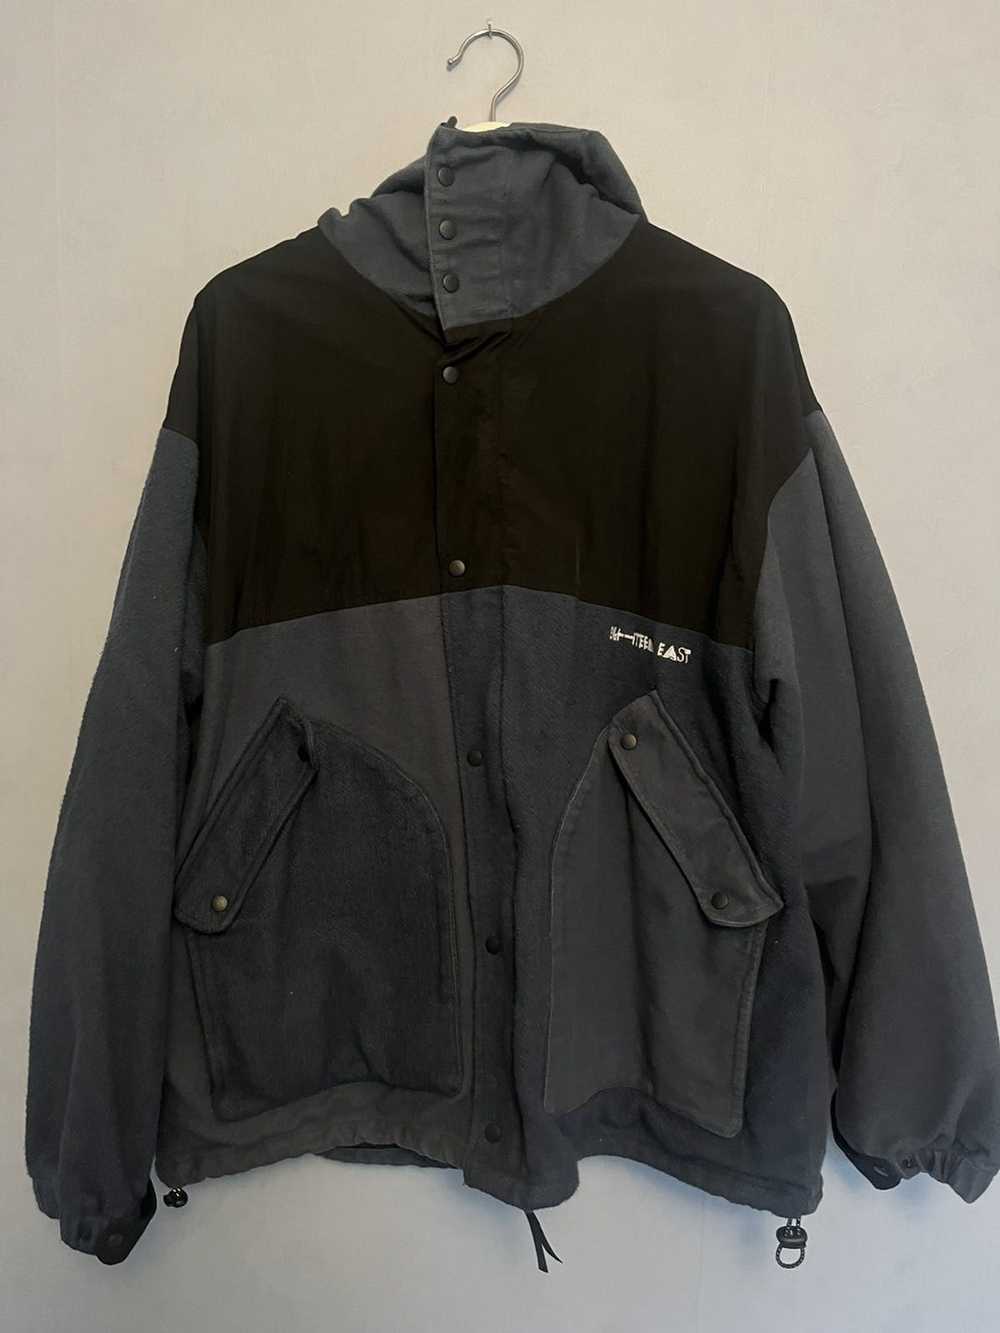 18 East 18 east navy cotton heavy jacket - image 1